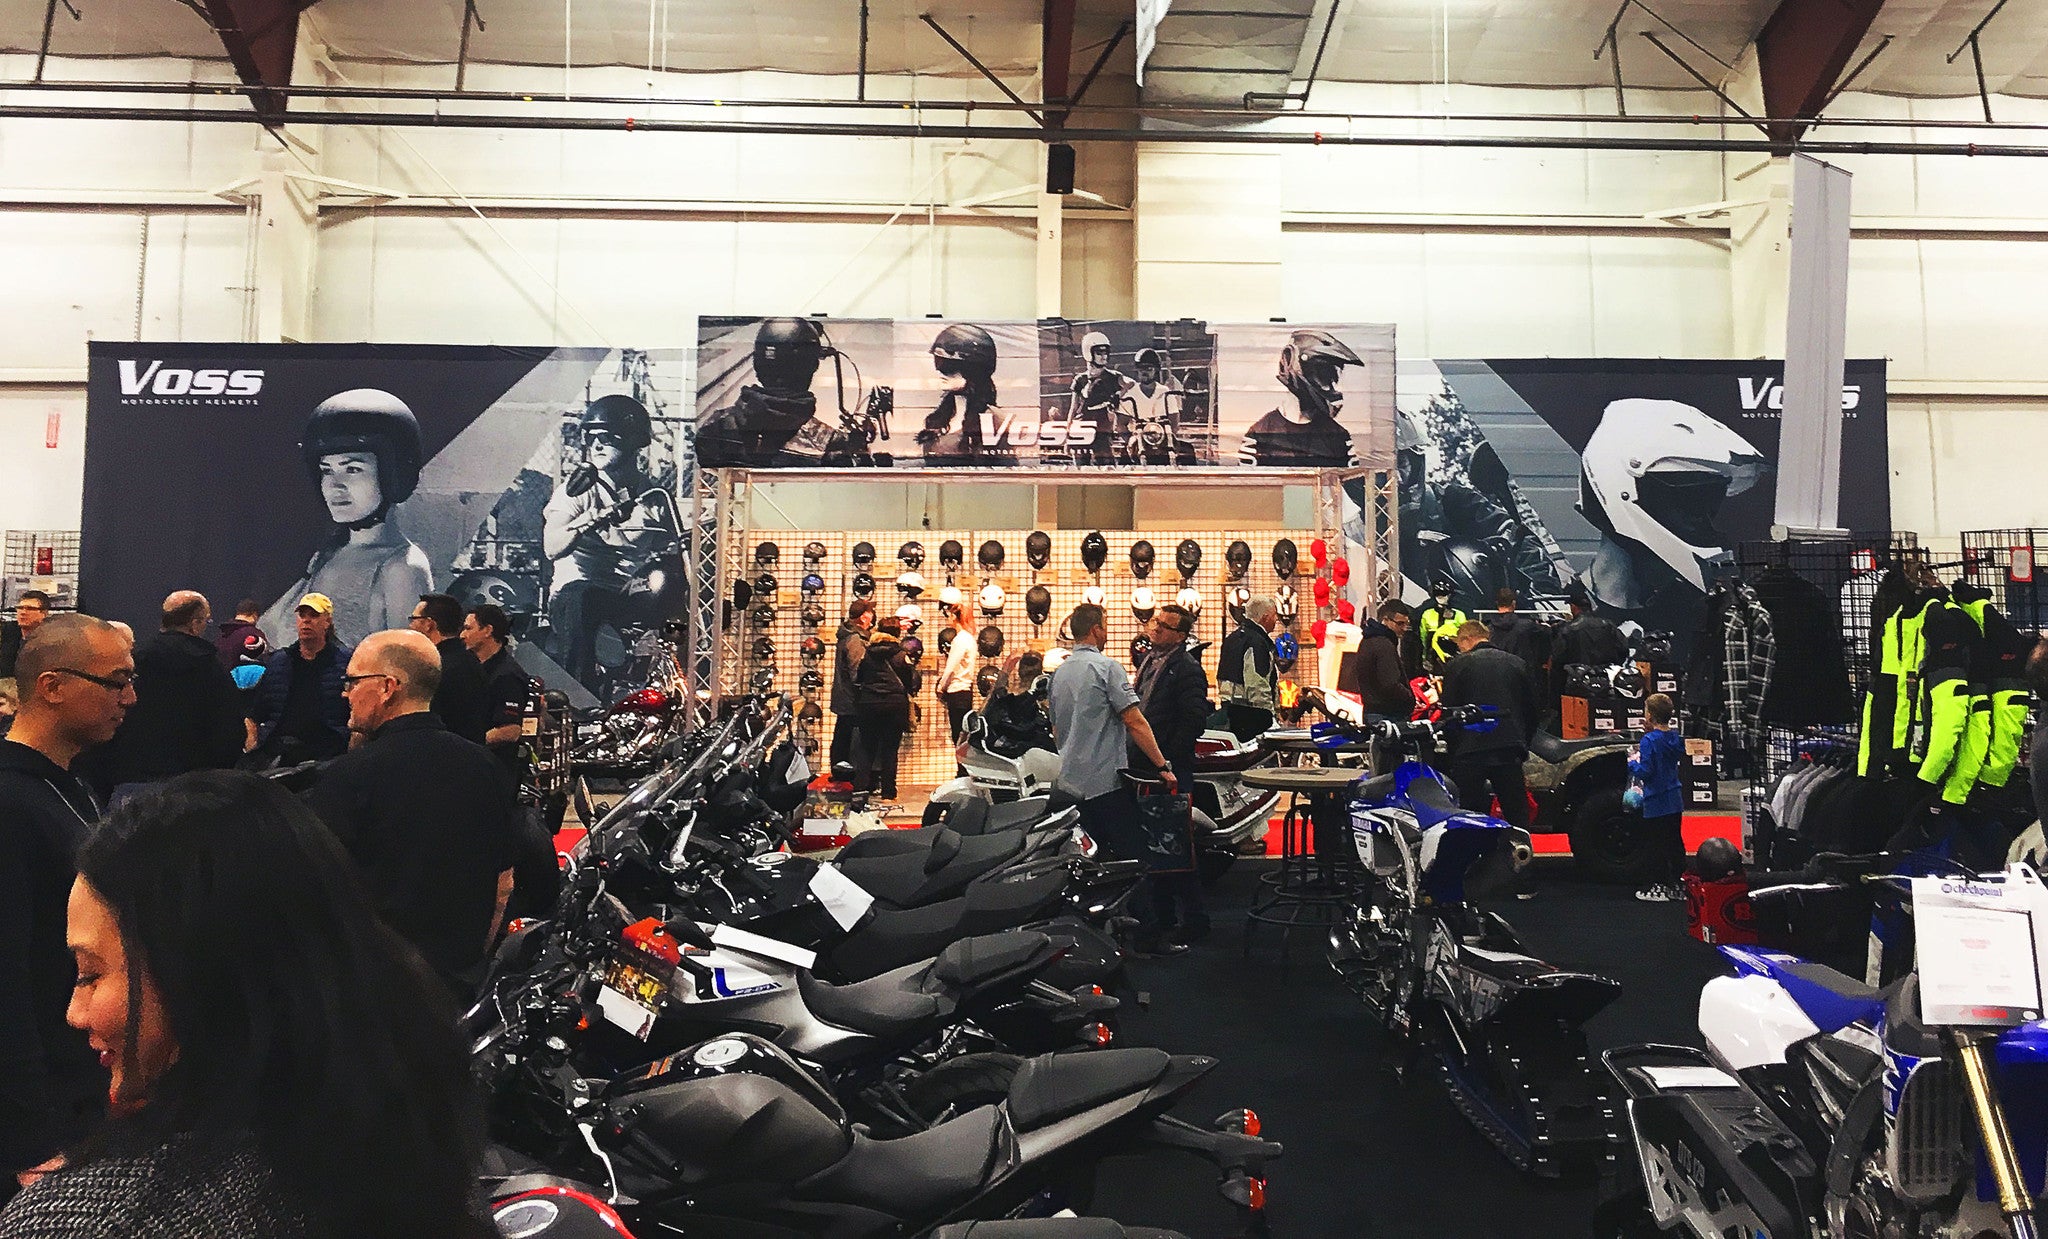 Thank you for the Visit! Vancouver Motorcycle Show 2017